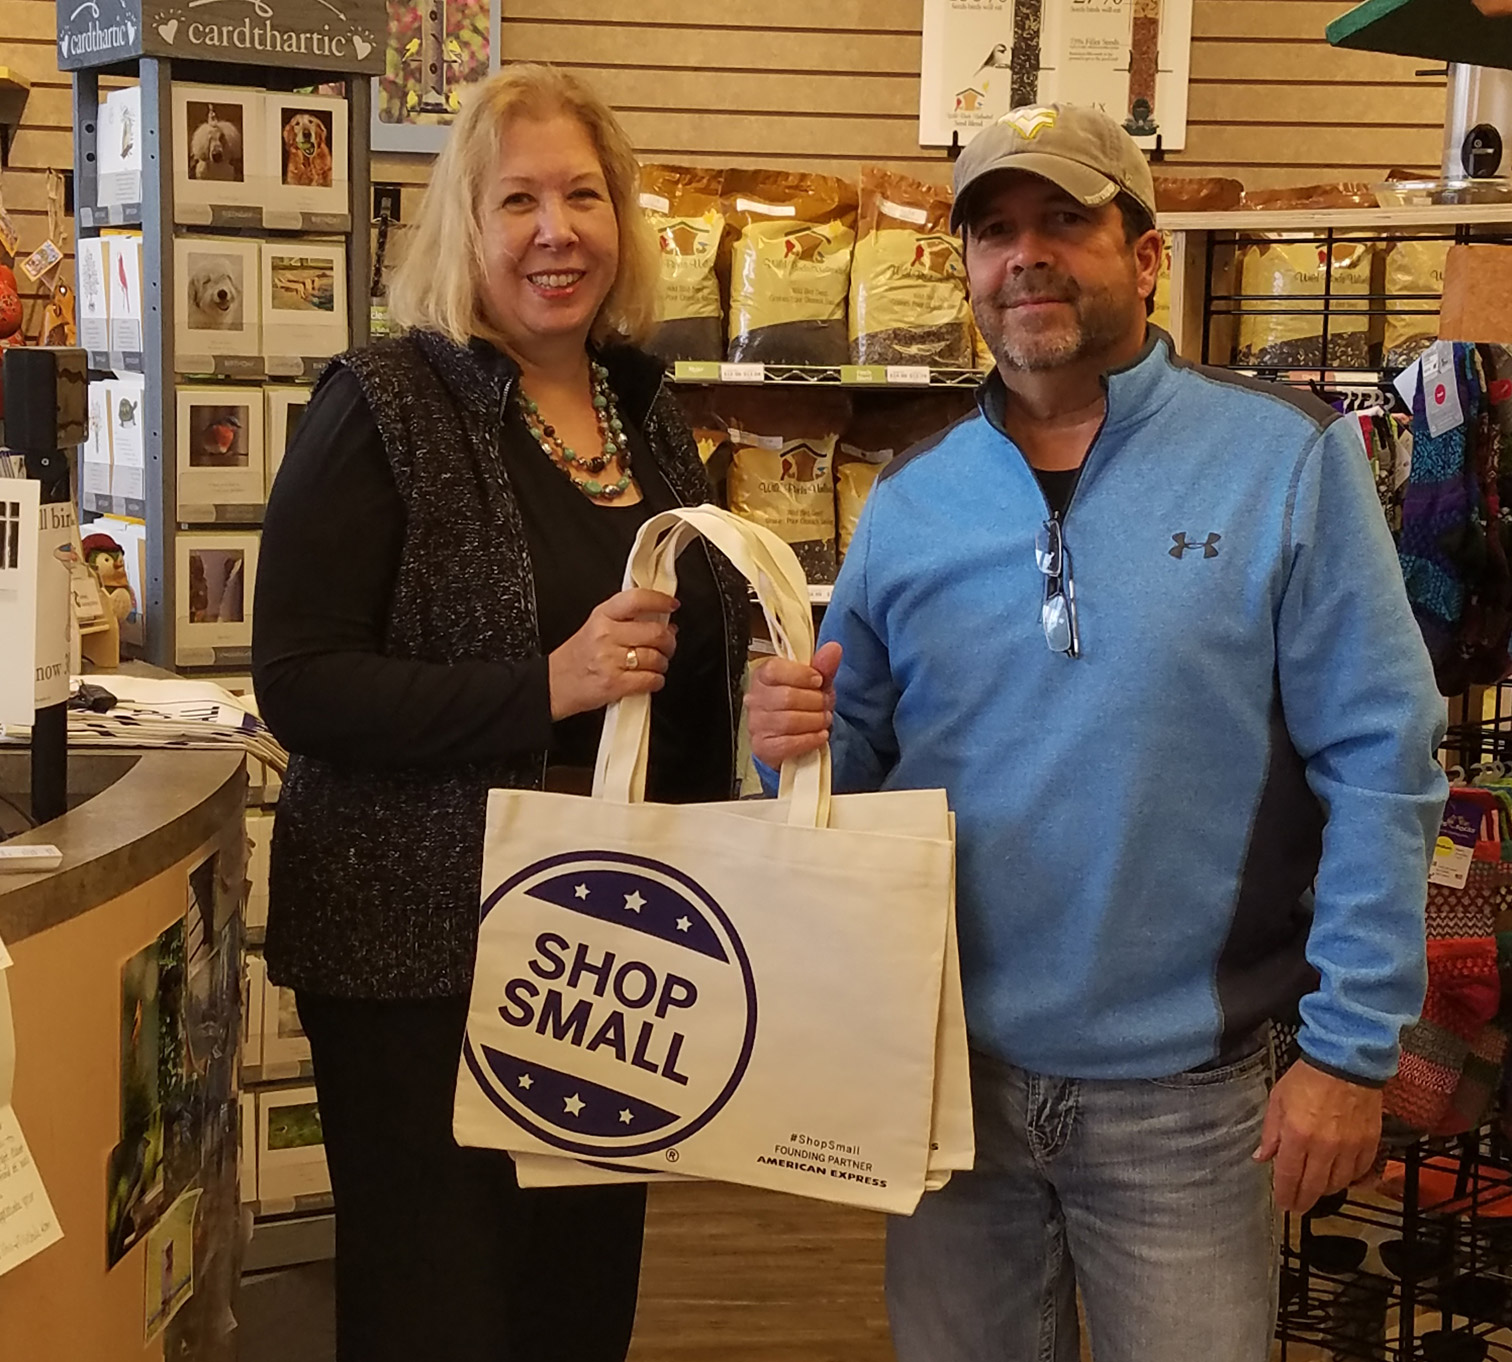 With Small Business Saturday quickly approaching, WV SBDC business coach Sharon Stratton is determined to make the 10th annual Small Business Saturday a success.